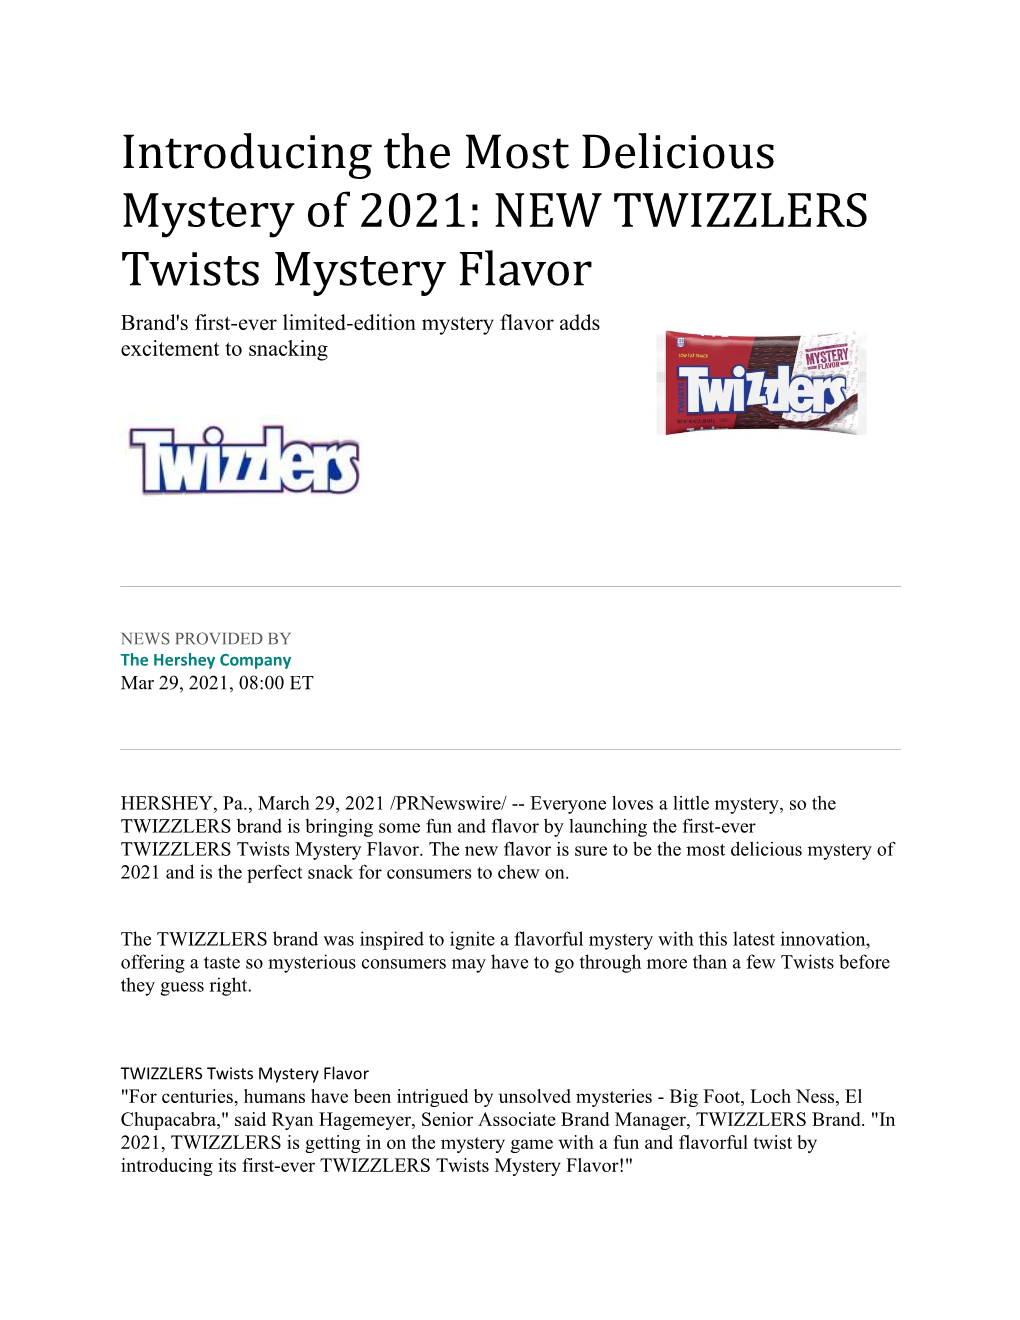 NEW TWIZZLERS Twists Mystery Flavor Brand's First-Ever Limited-Edition Mystery Flavor Adds Excitement to Snacking